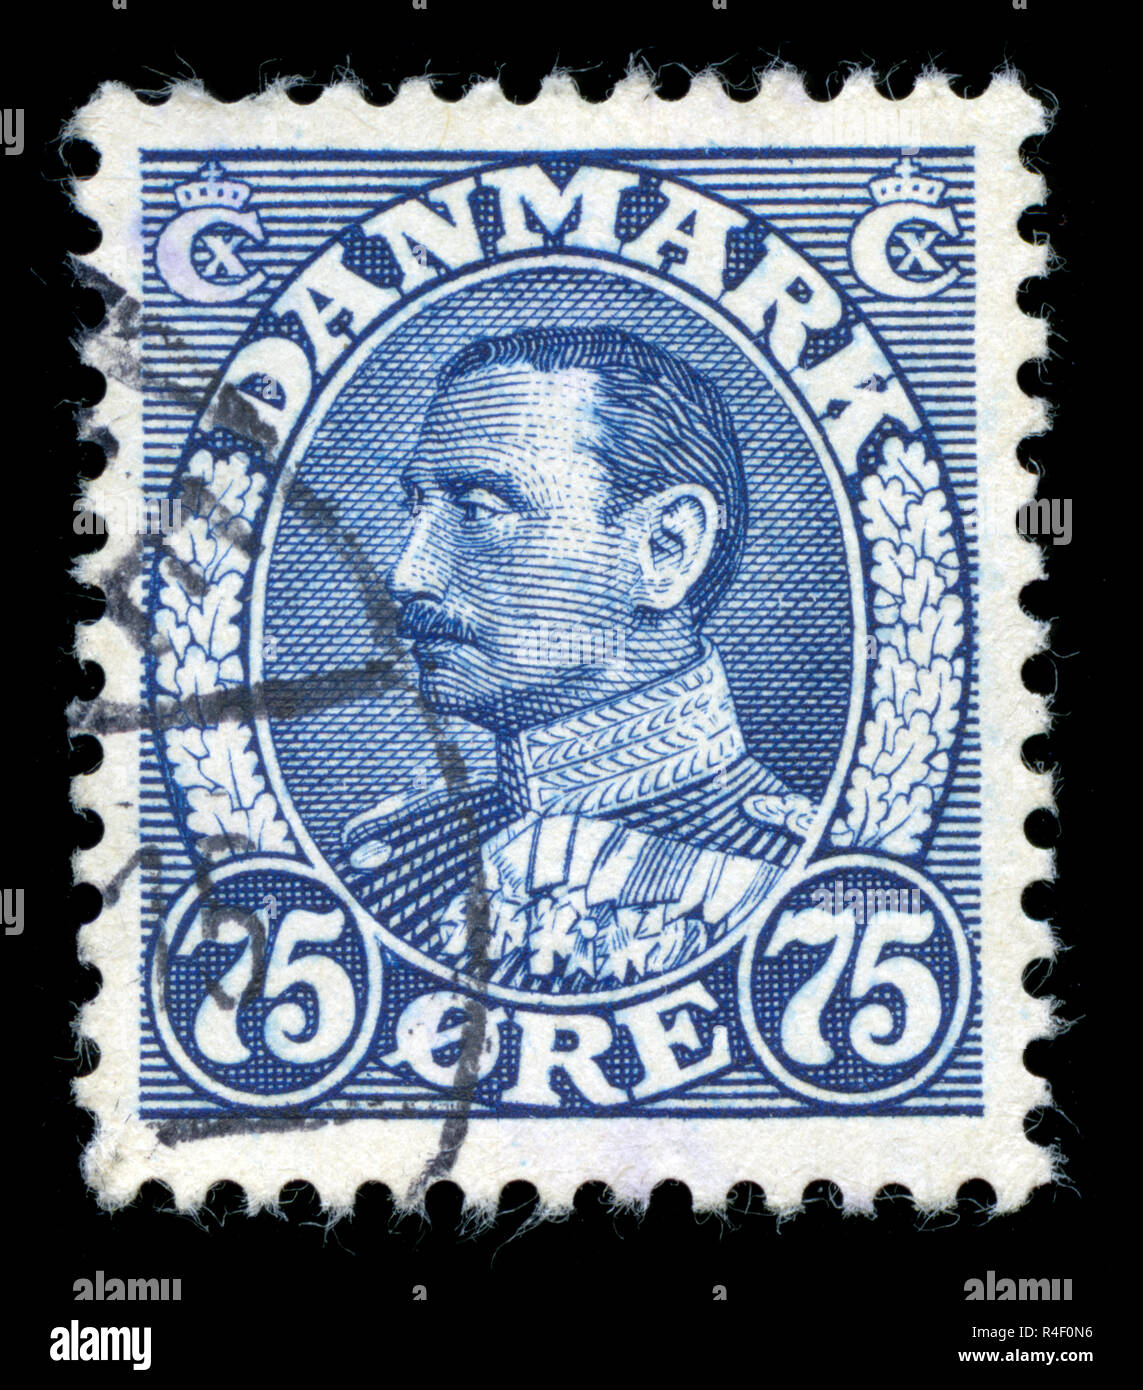 Postmarked stamp from Denmark in the King Christian X - facing left series issued in 1941 Stock Photo